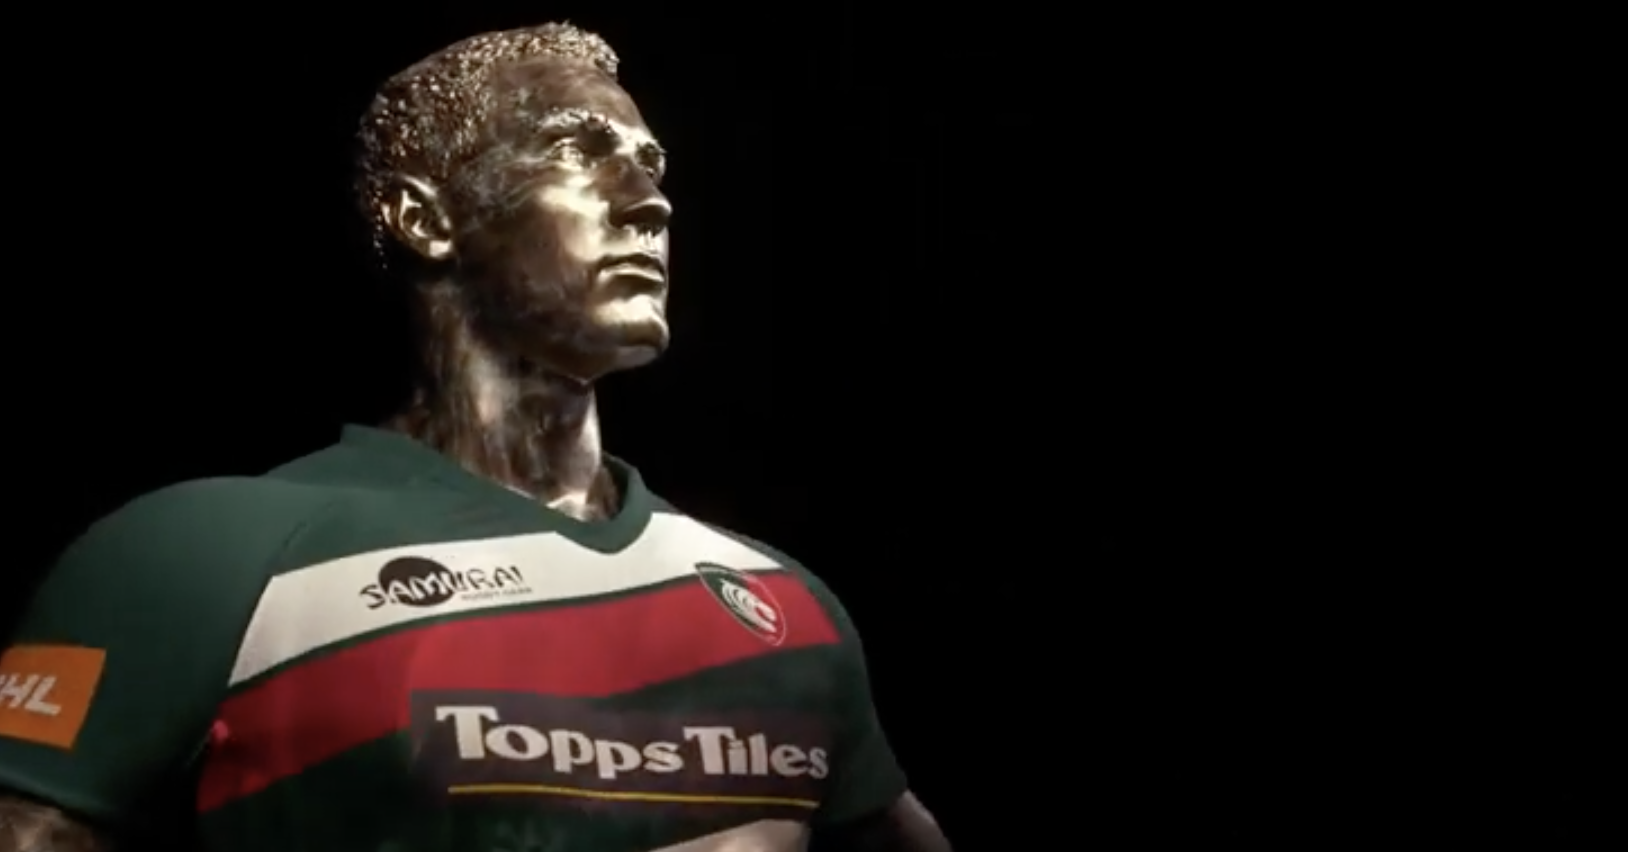 leicester tigers home shirt